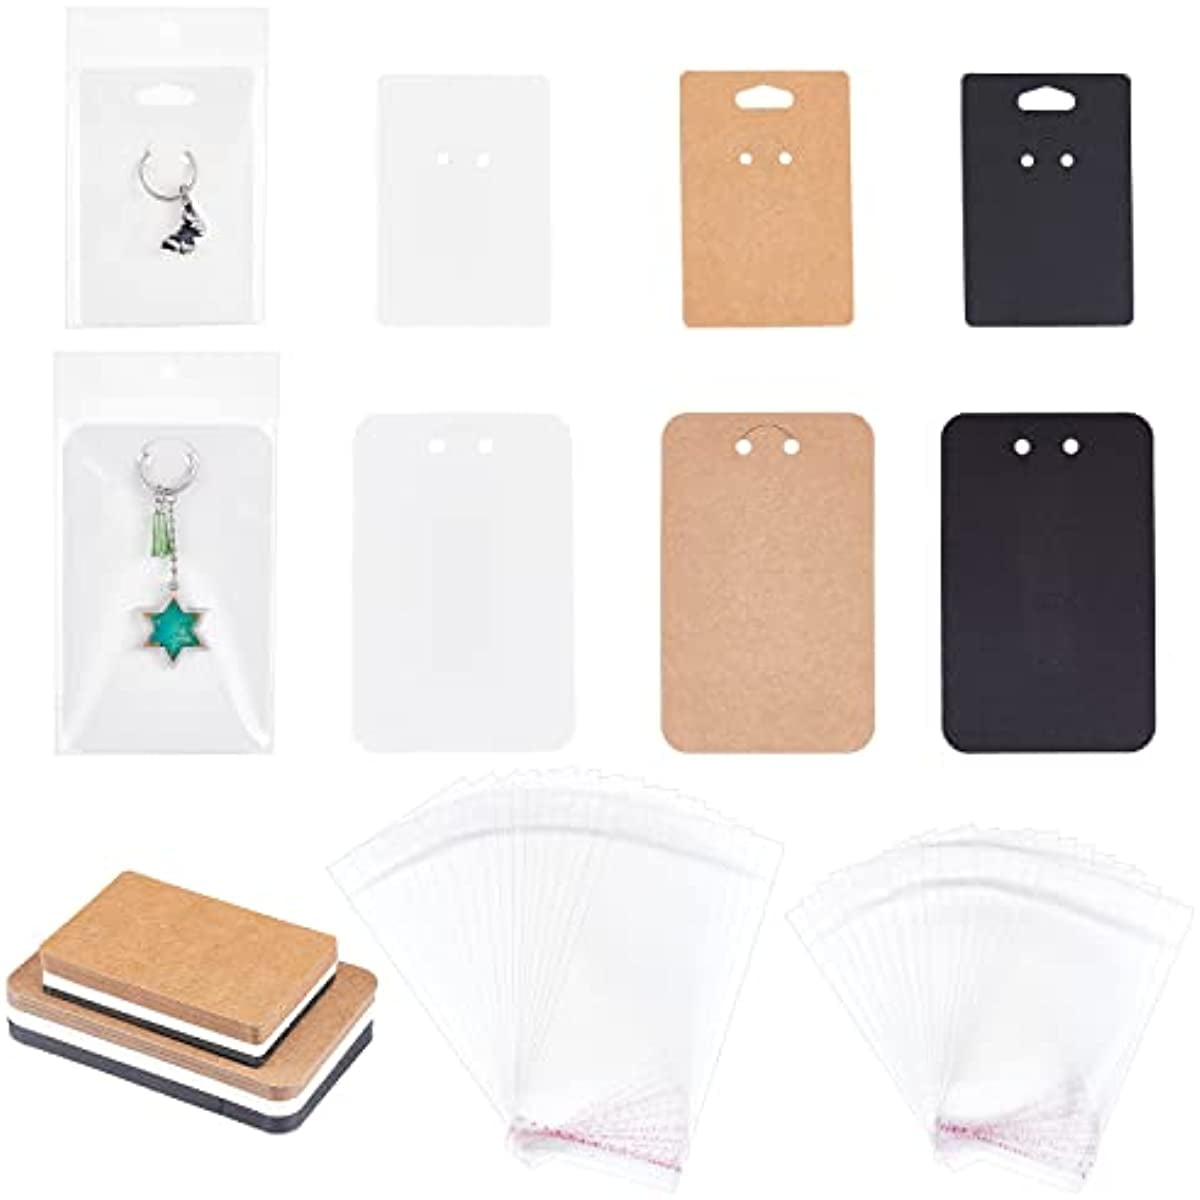 120 Sets Keychain Display Cards with Self-Sealing Bags 6 Styles